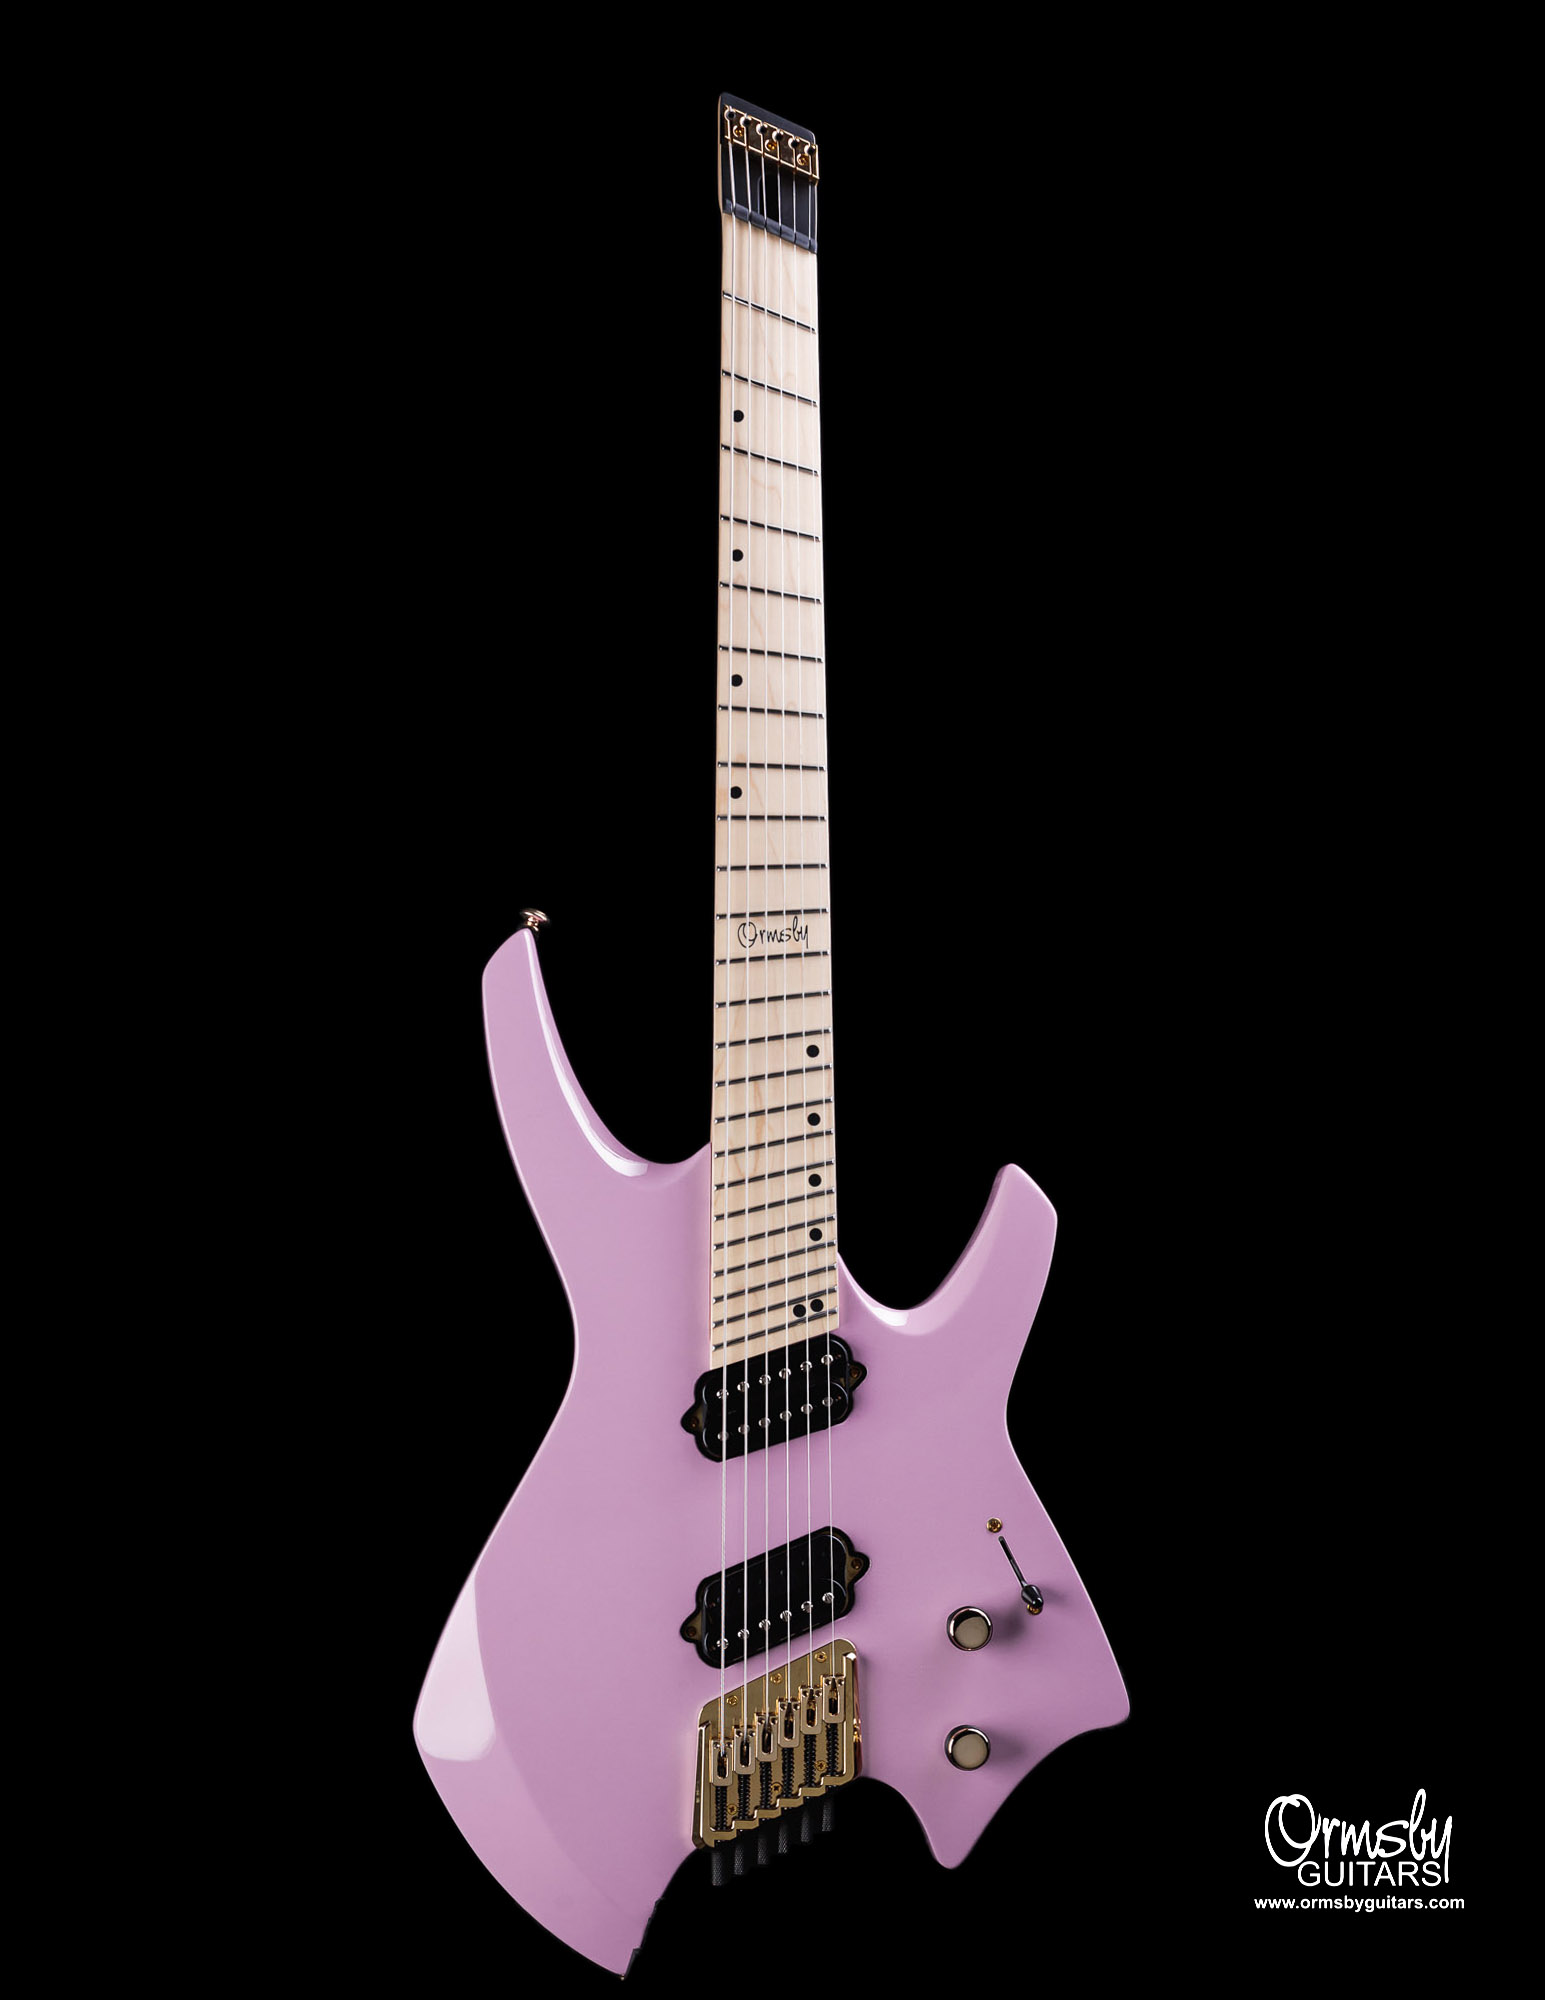 Ormsby headless goliath shell baby pink electric guitar